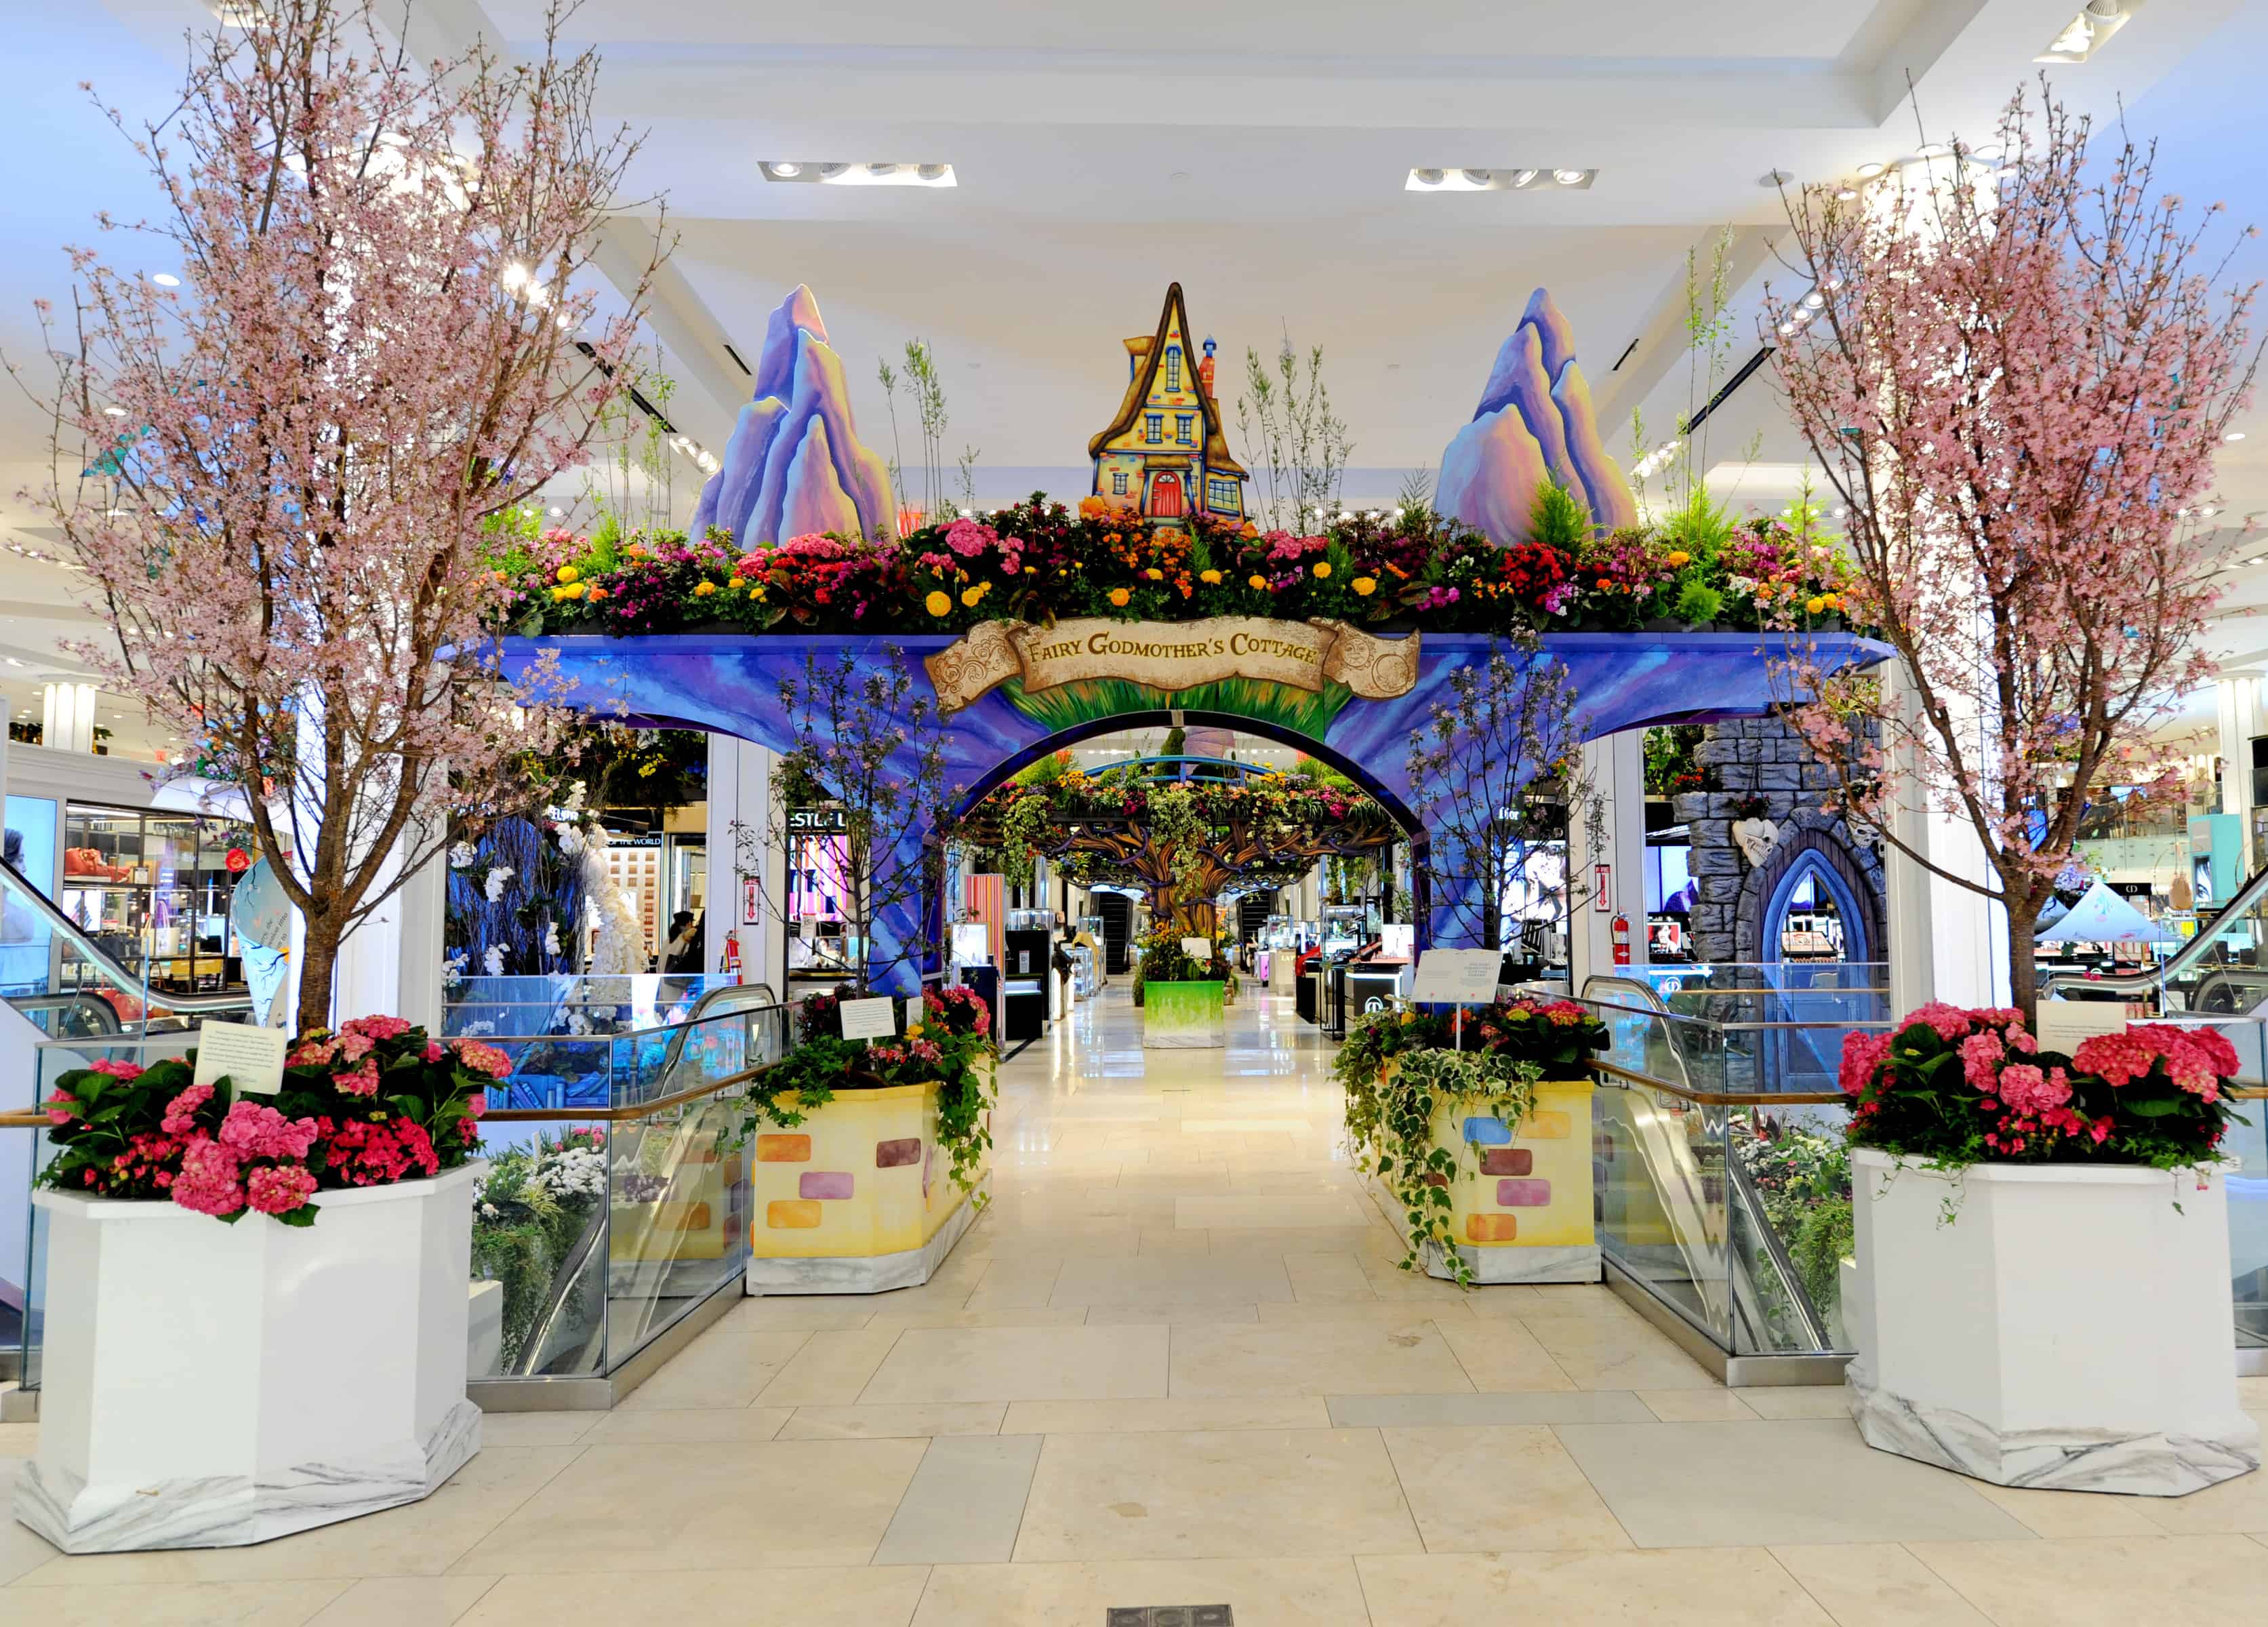 SPRING IS IN FULL BLOOM AT MACY'S ANNUAL FLOWER SHOW